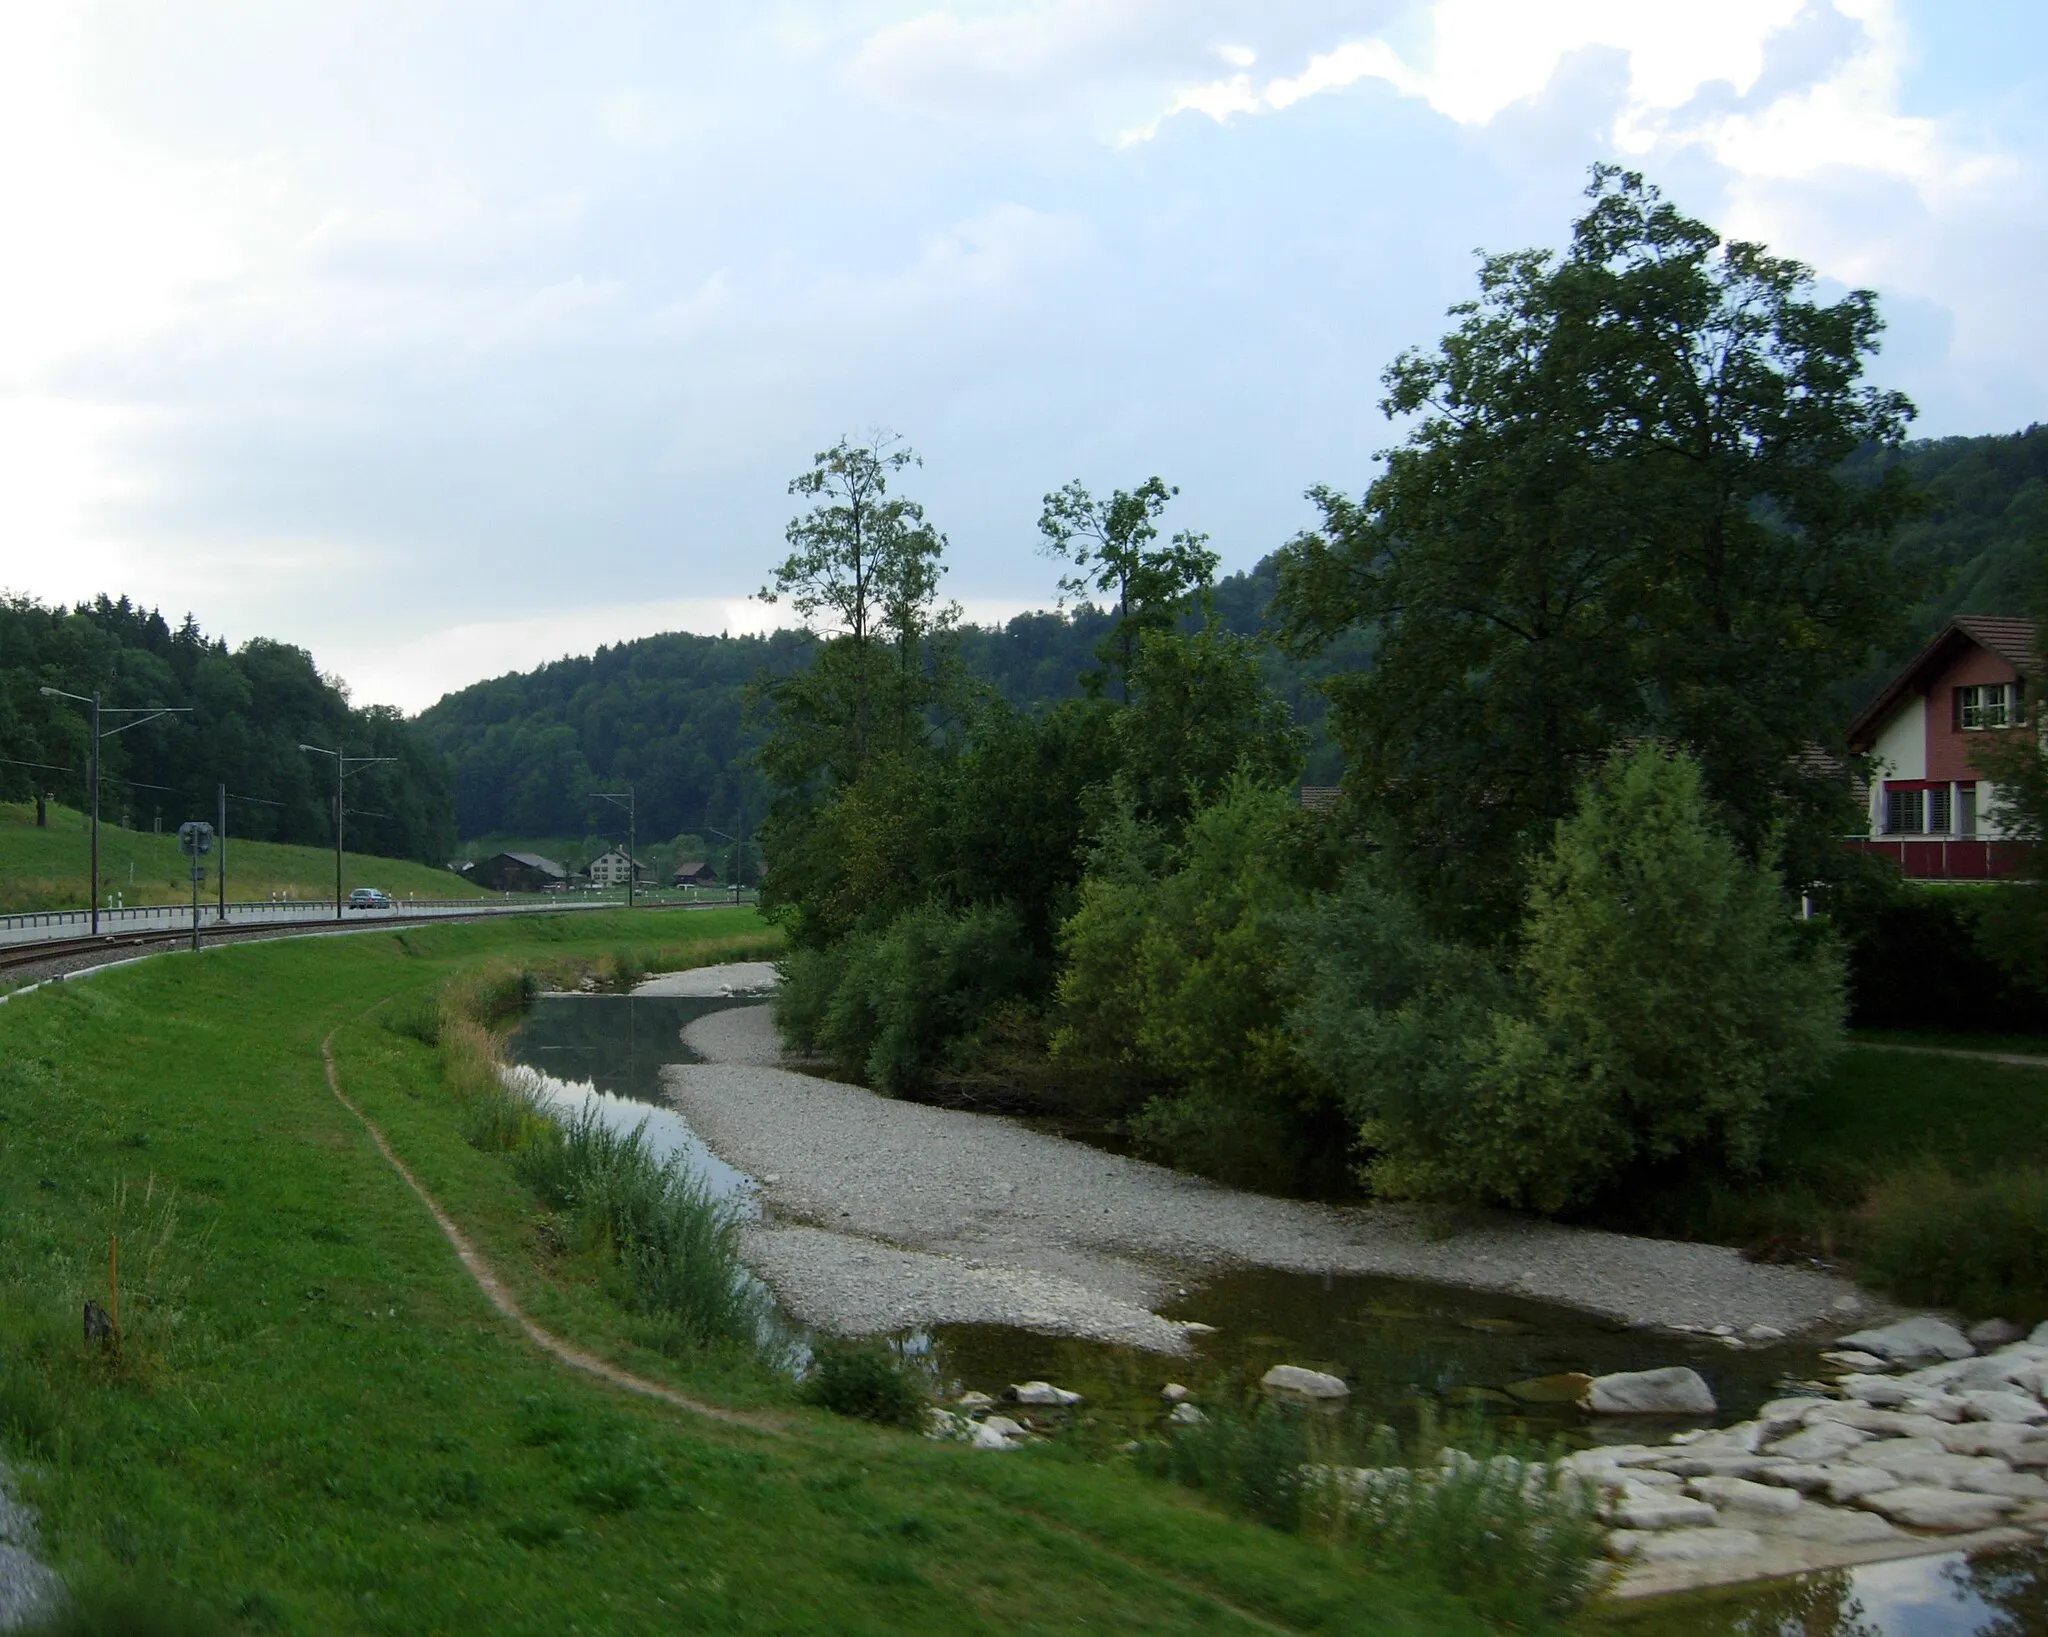 Photo showing: The river Töss is on the right along with some houses. The river is flowing away from the viewer here. A railroad track of the SBB is visible on the left along with a signal. This picture was taken from the S26 train.